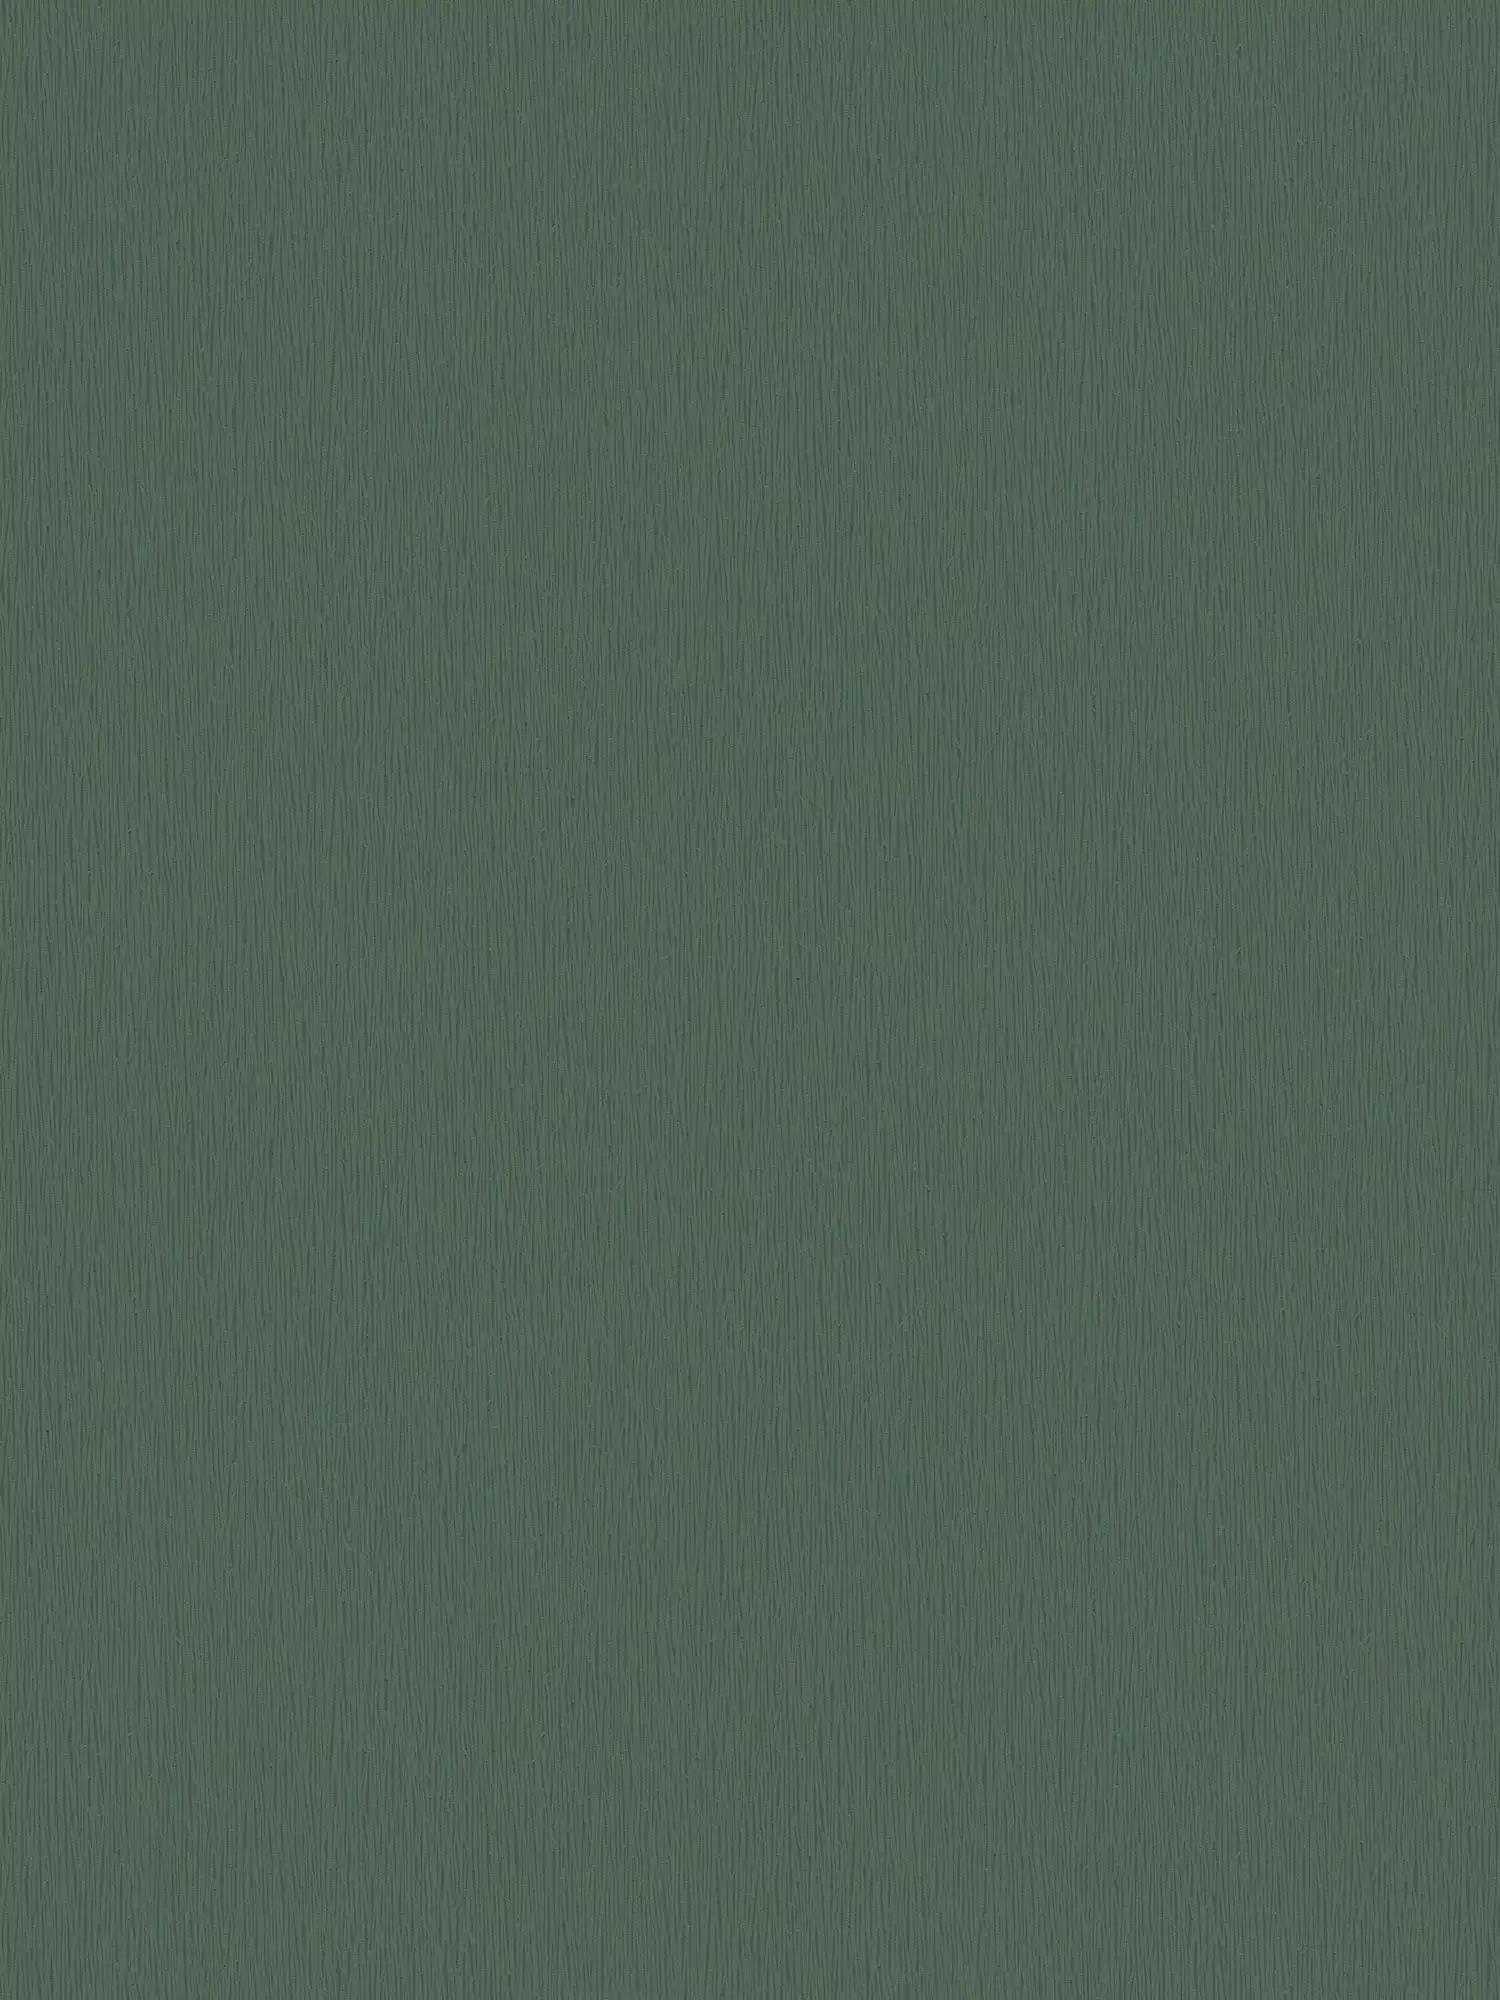 Non-woven wallpaper dark green with natural tone-on-tone texture pattern
